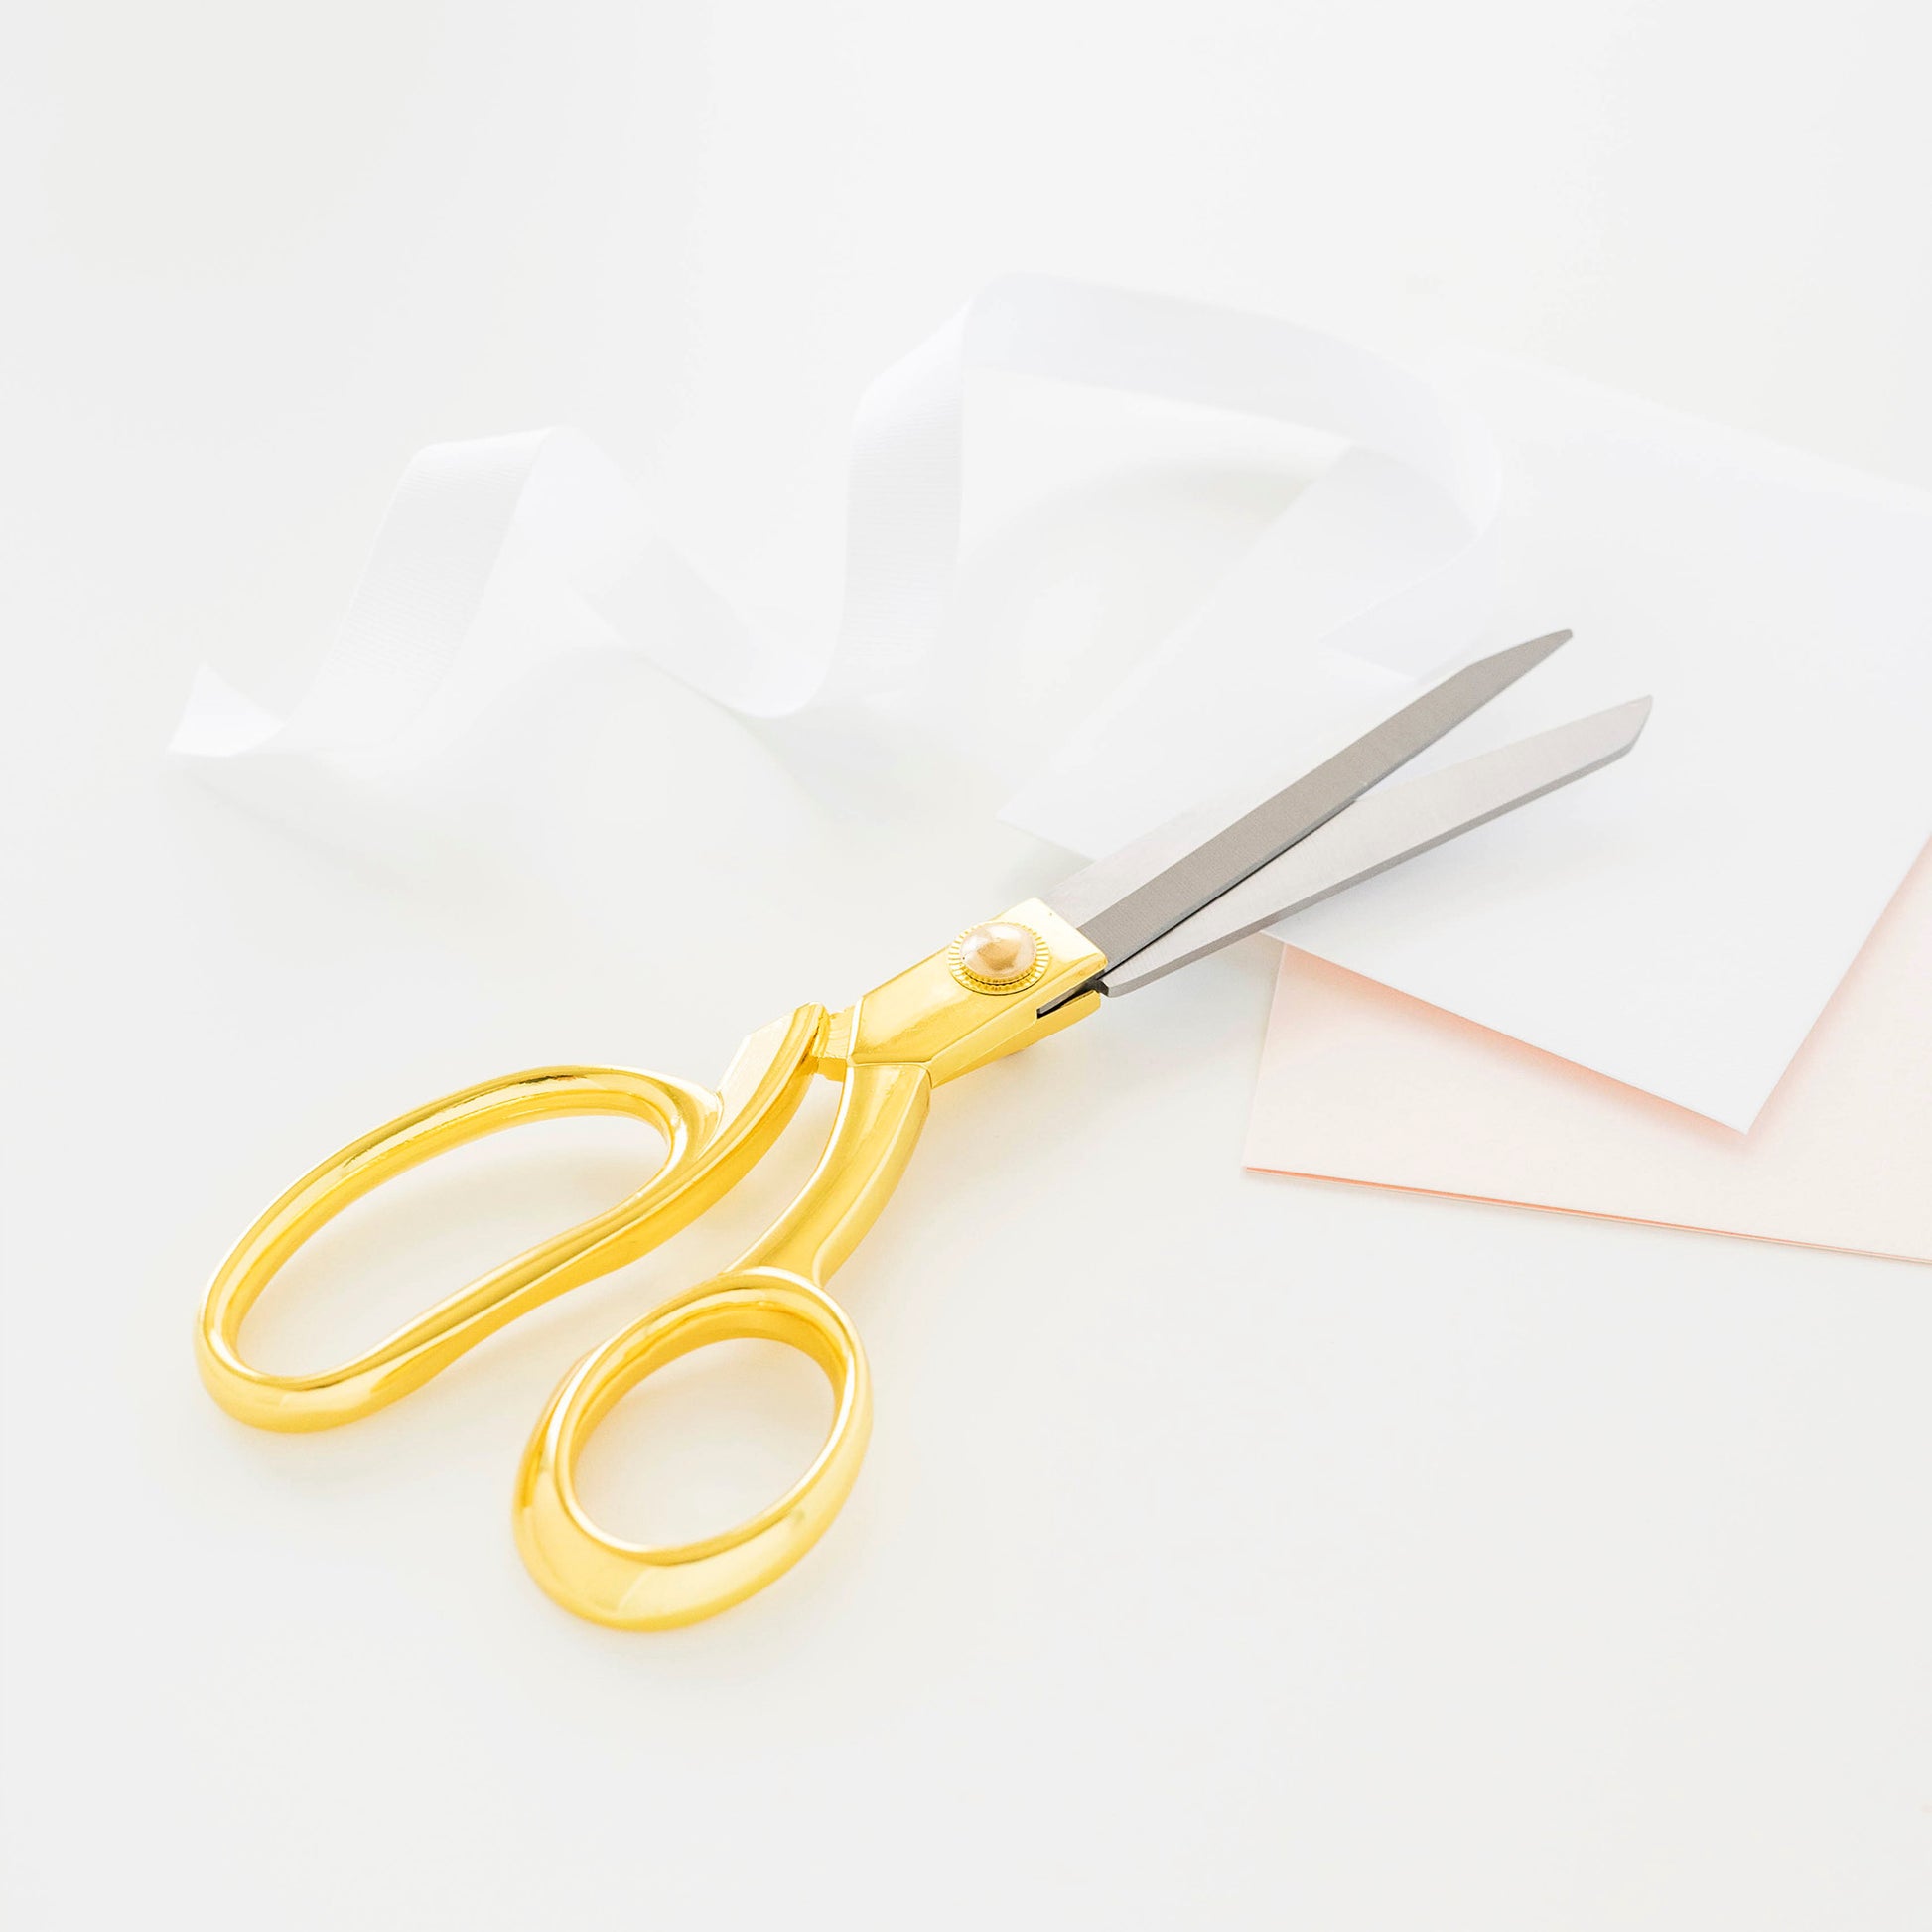 7.7 Inch Craft Scissors All Purpose Fabric Sewing Scissors Acrylic Sharp  Stainless Steel Shears Paper Cutter for School Office Supplies (Gold)